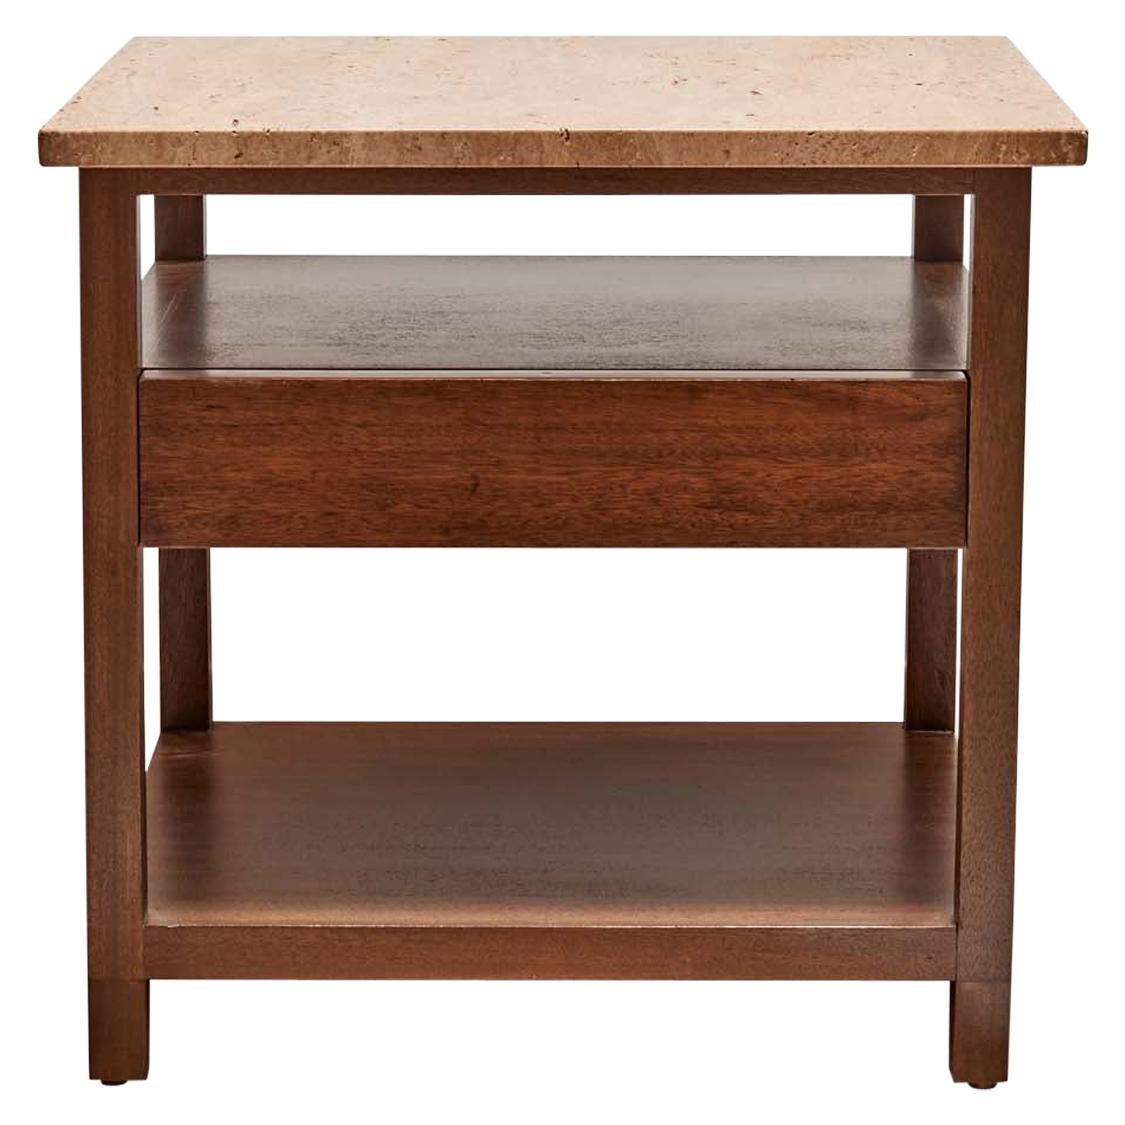 Travertine Topped Side Table by Harvey Probber Inc.